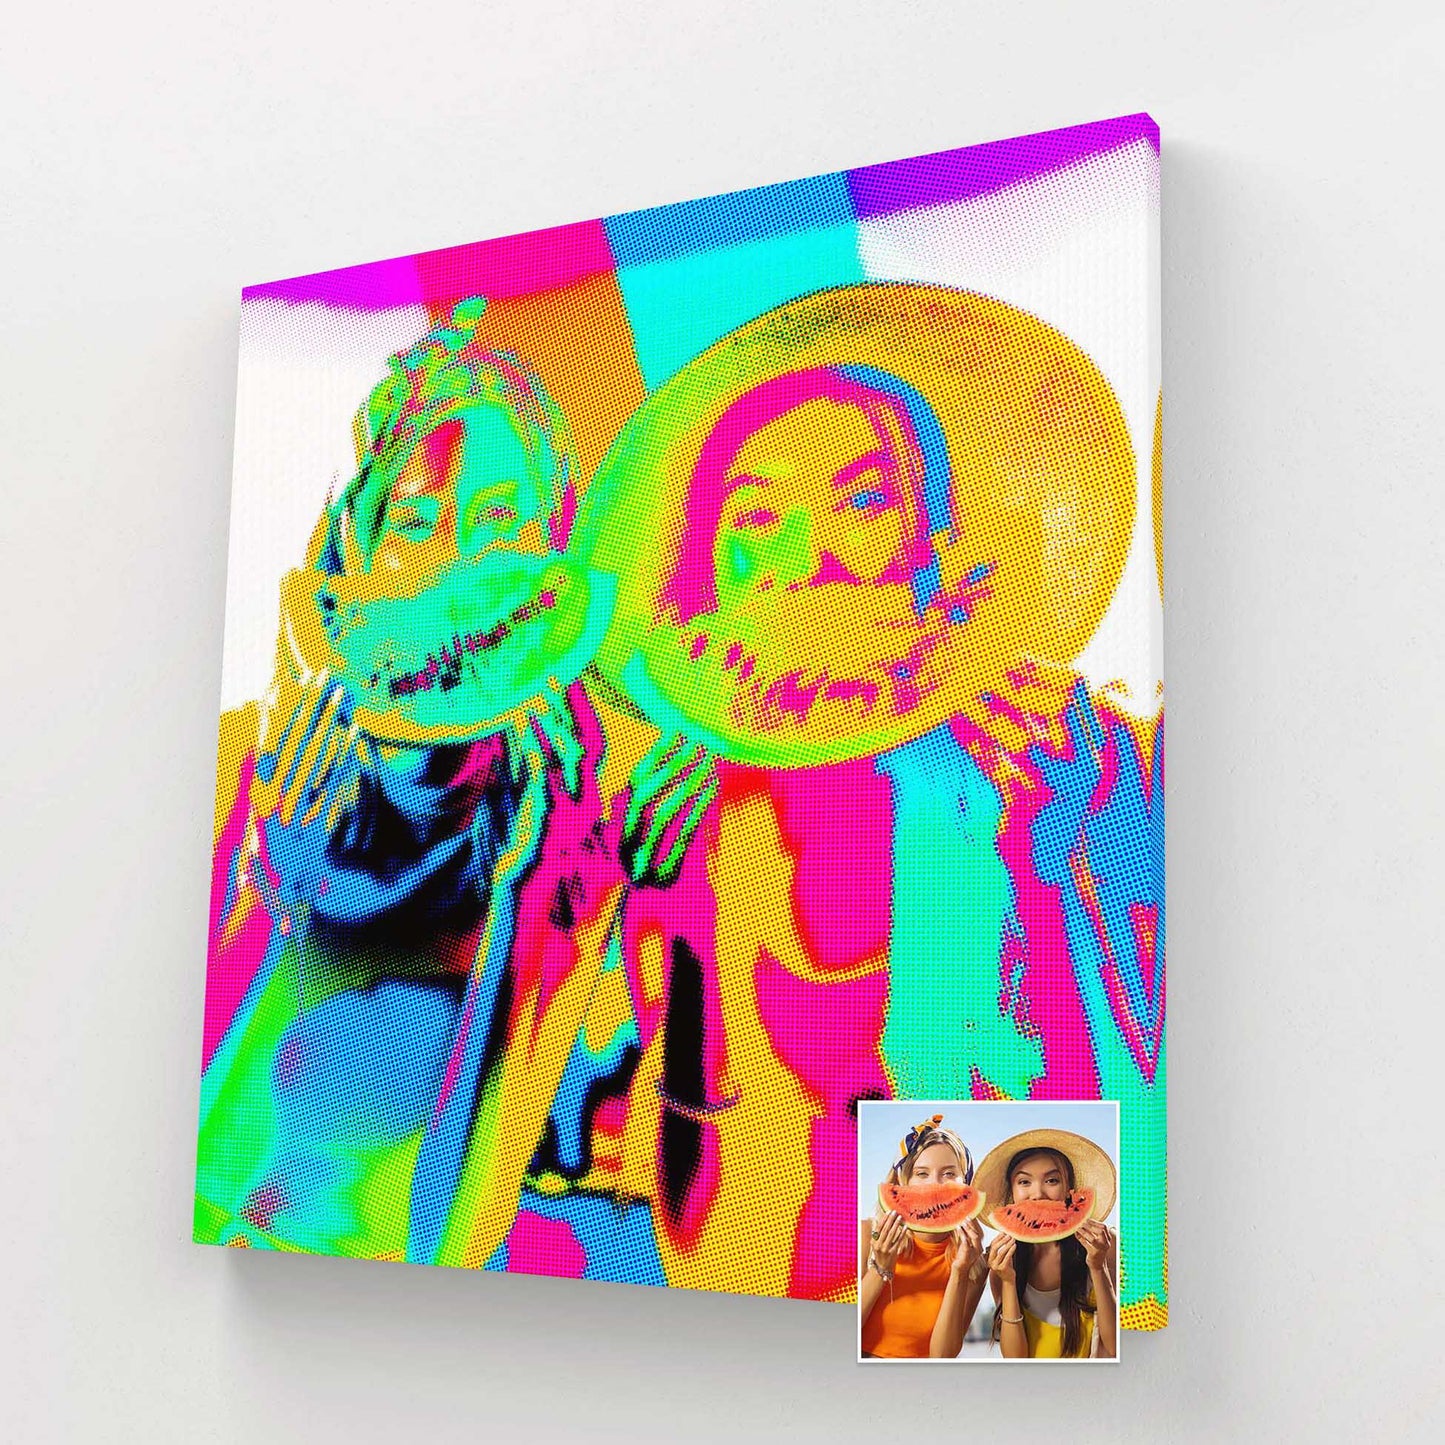 Immerse yourself in the world of Pop Art with a personalized canvas. This print from photo artwork features a distinctive halftone texture and is handmade on canvas, giving it an authentic touch. The cool and trendy urban vibes